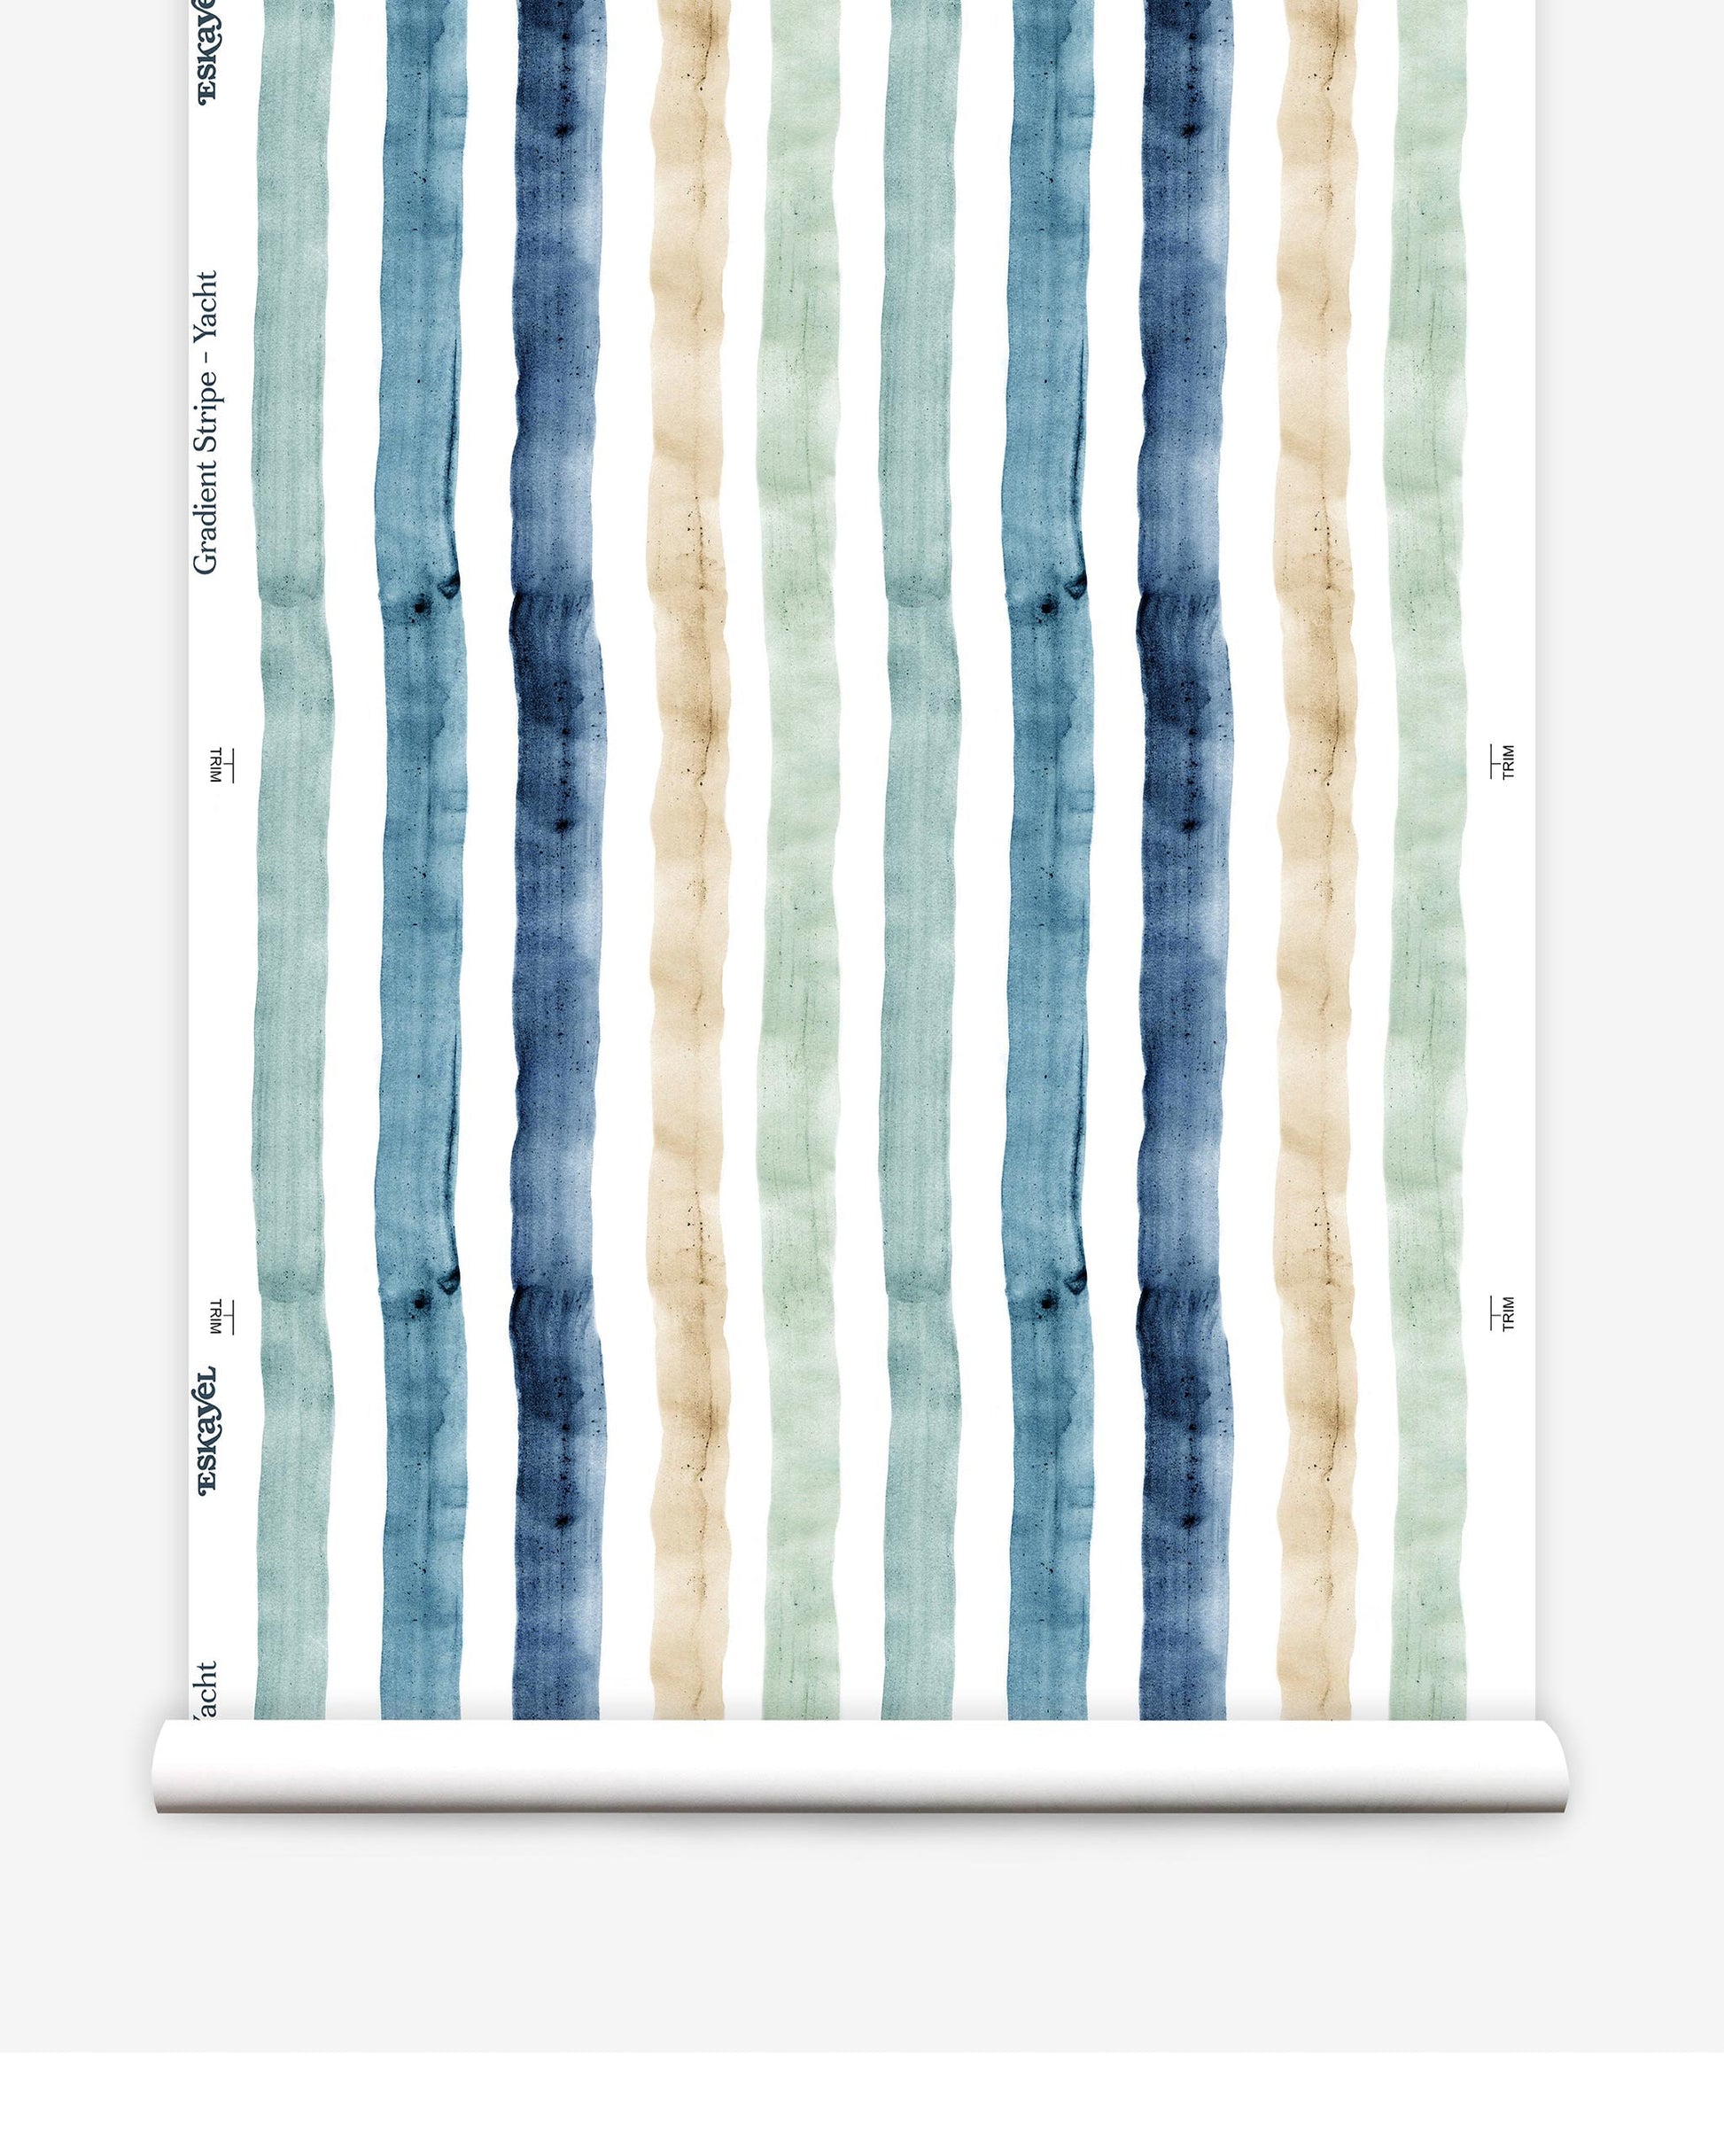 A roll of Gradient Stripe Wallpaper with blue, green, and beige stripes